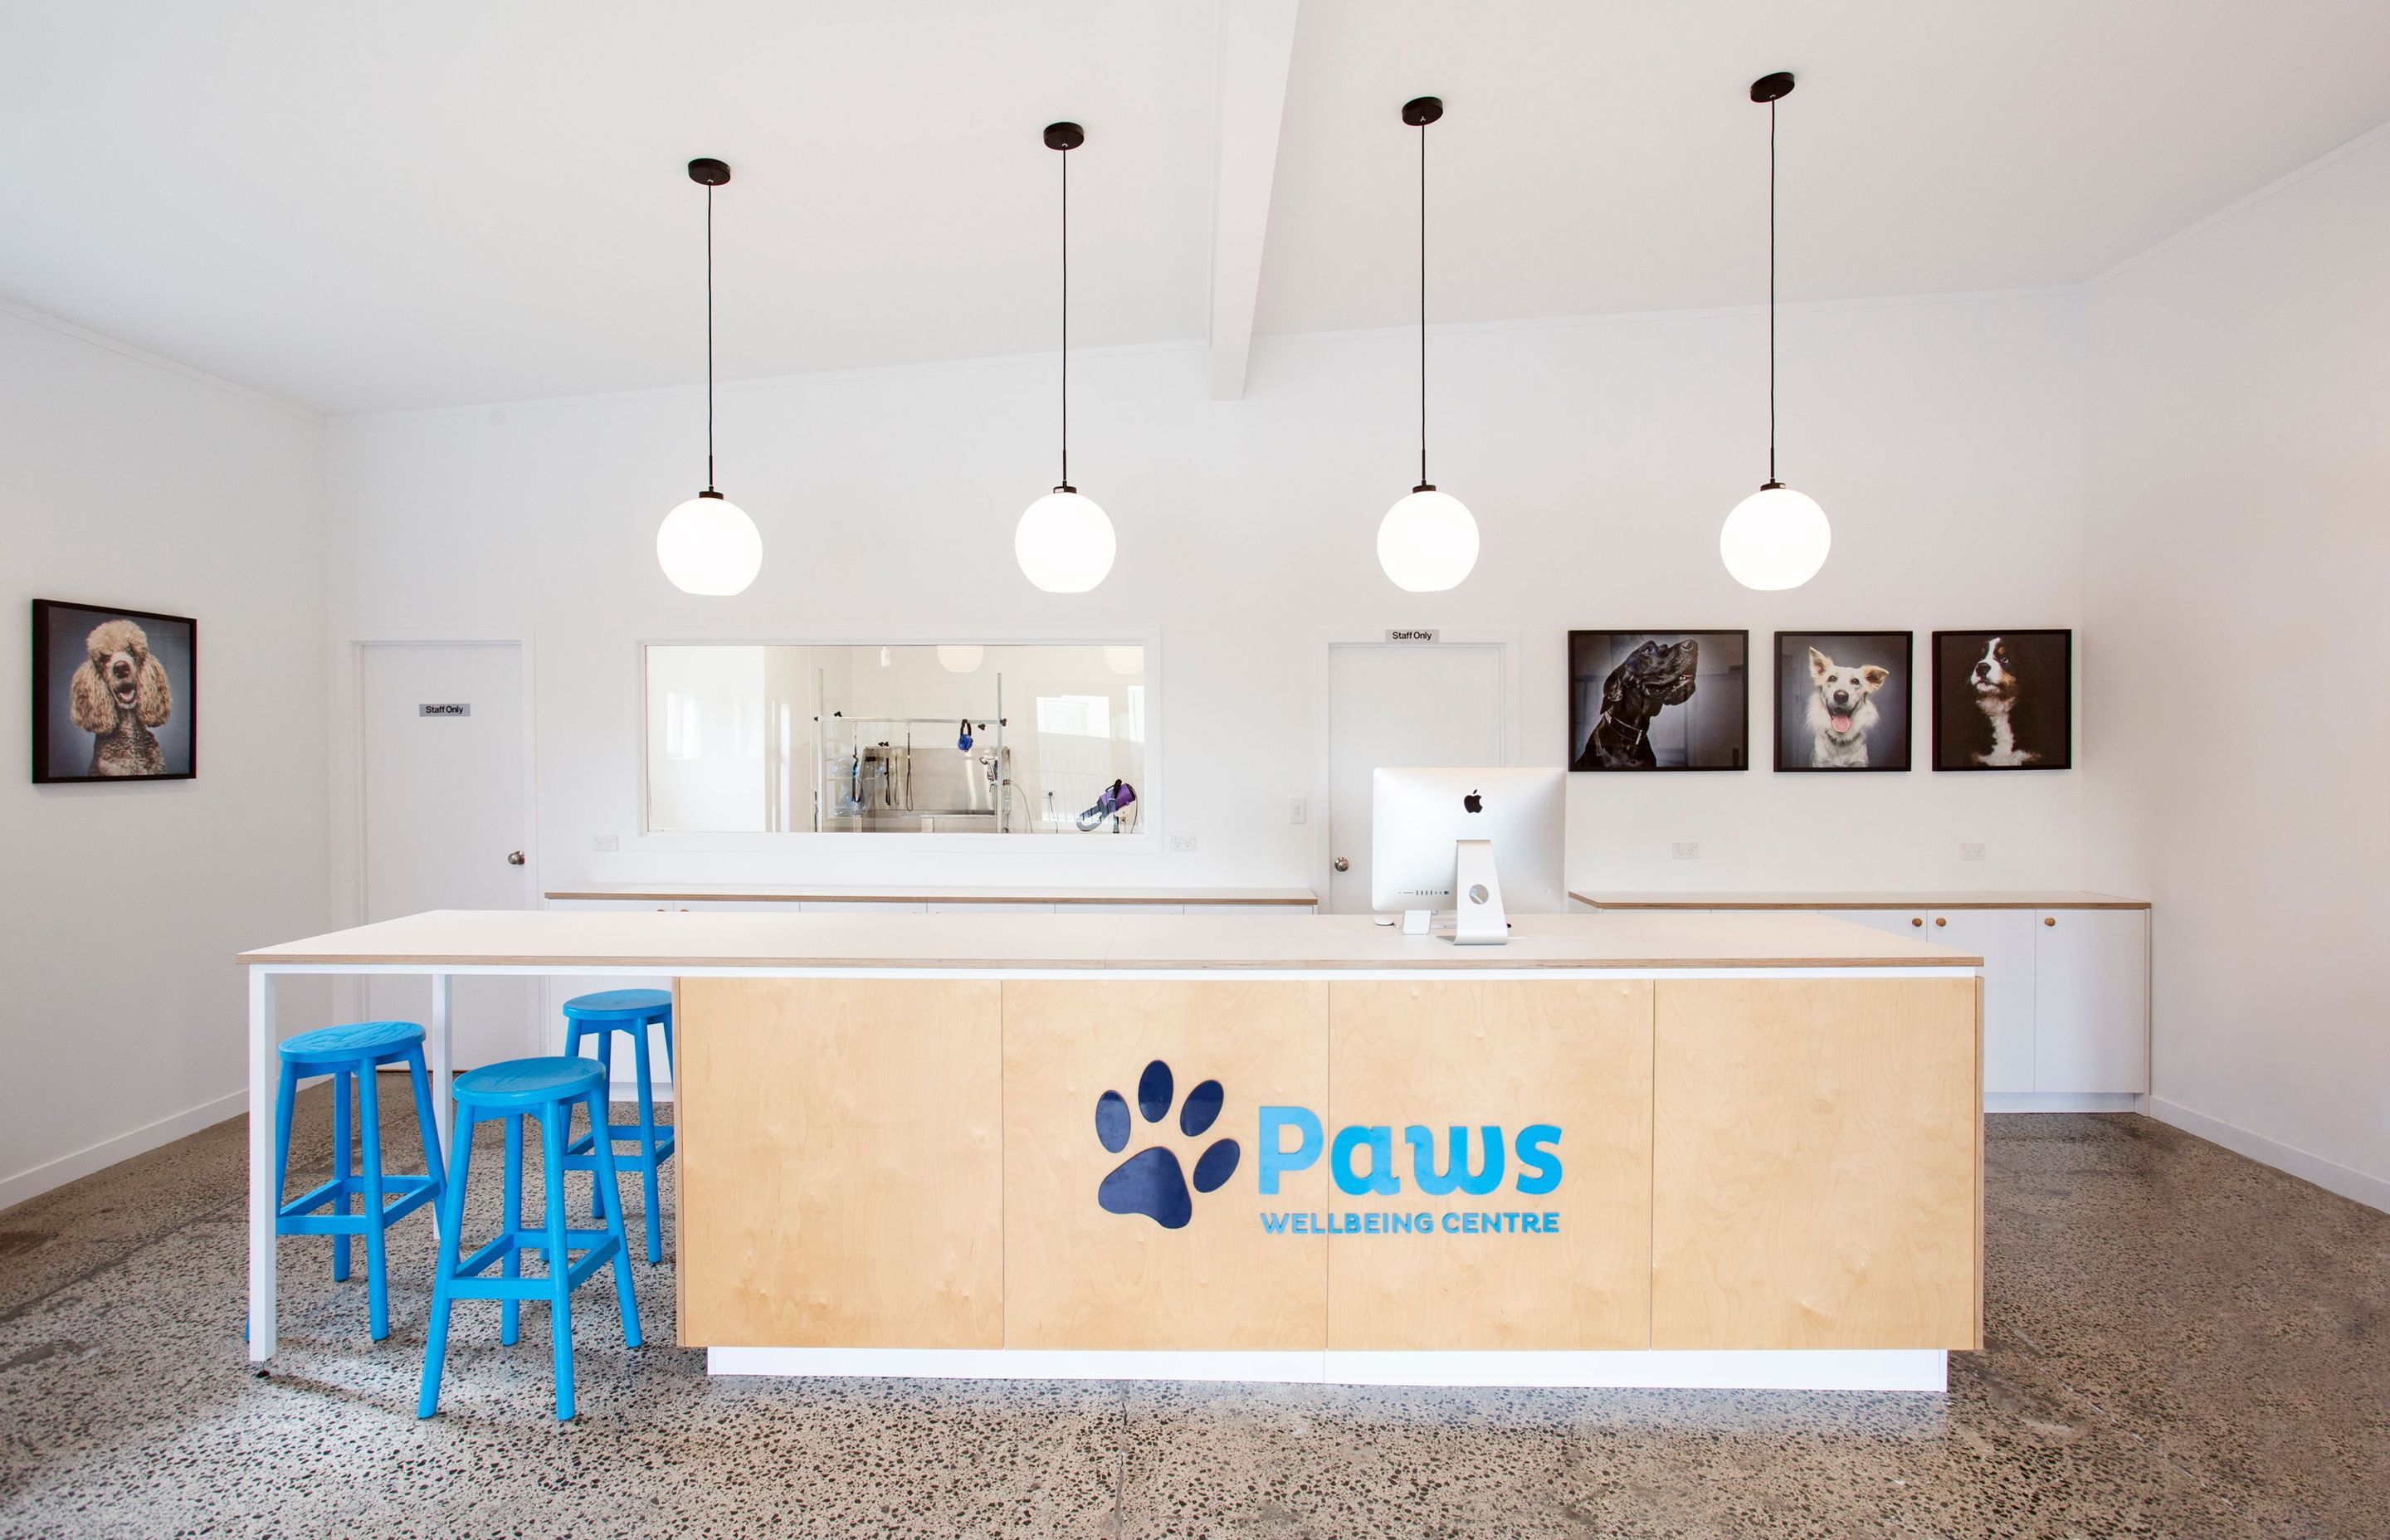 Paws Wellbeing Centre